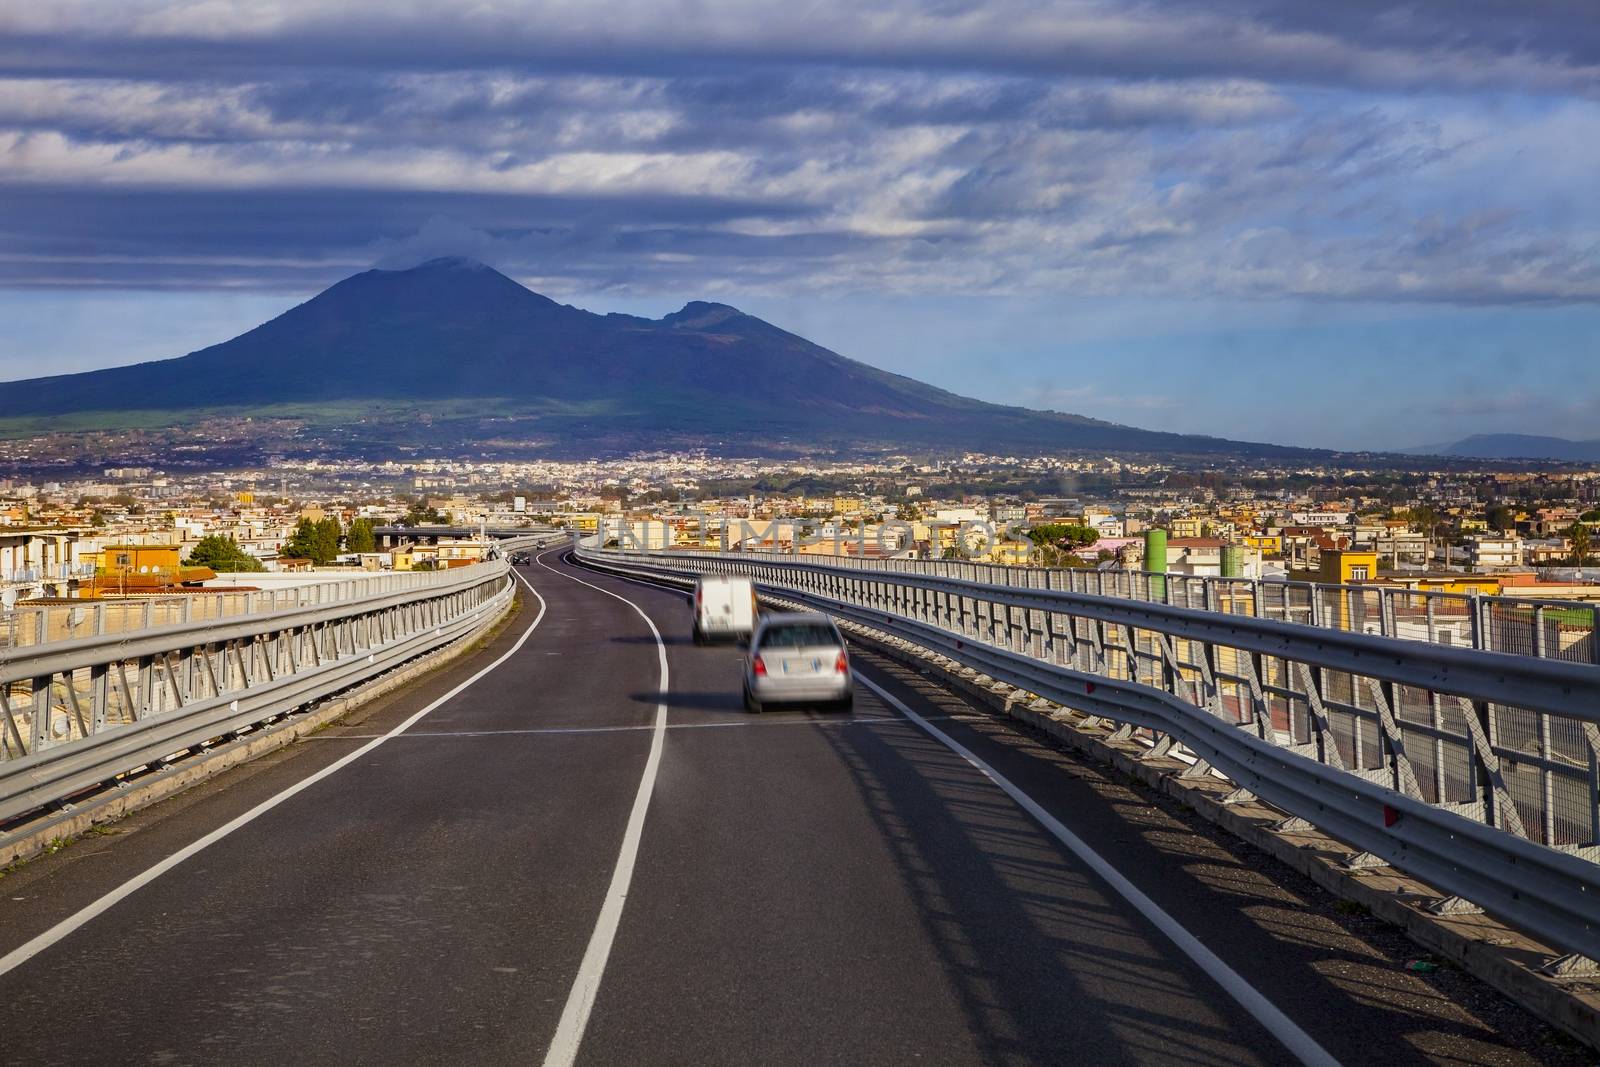 A one motorway from naple to rome passing naple town and vesuvius volcano scene